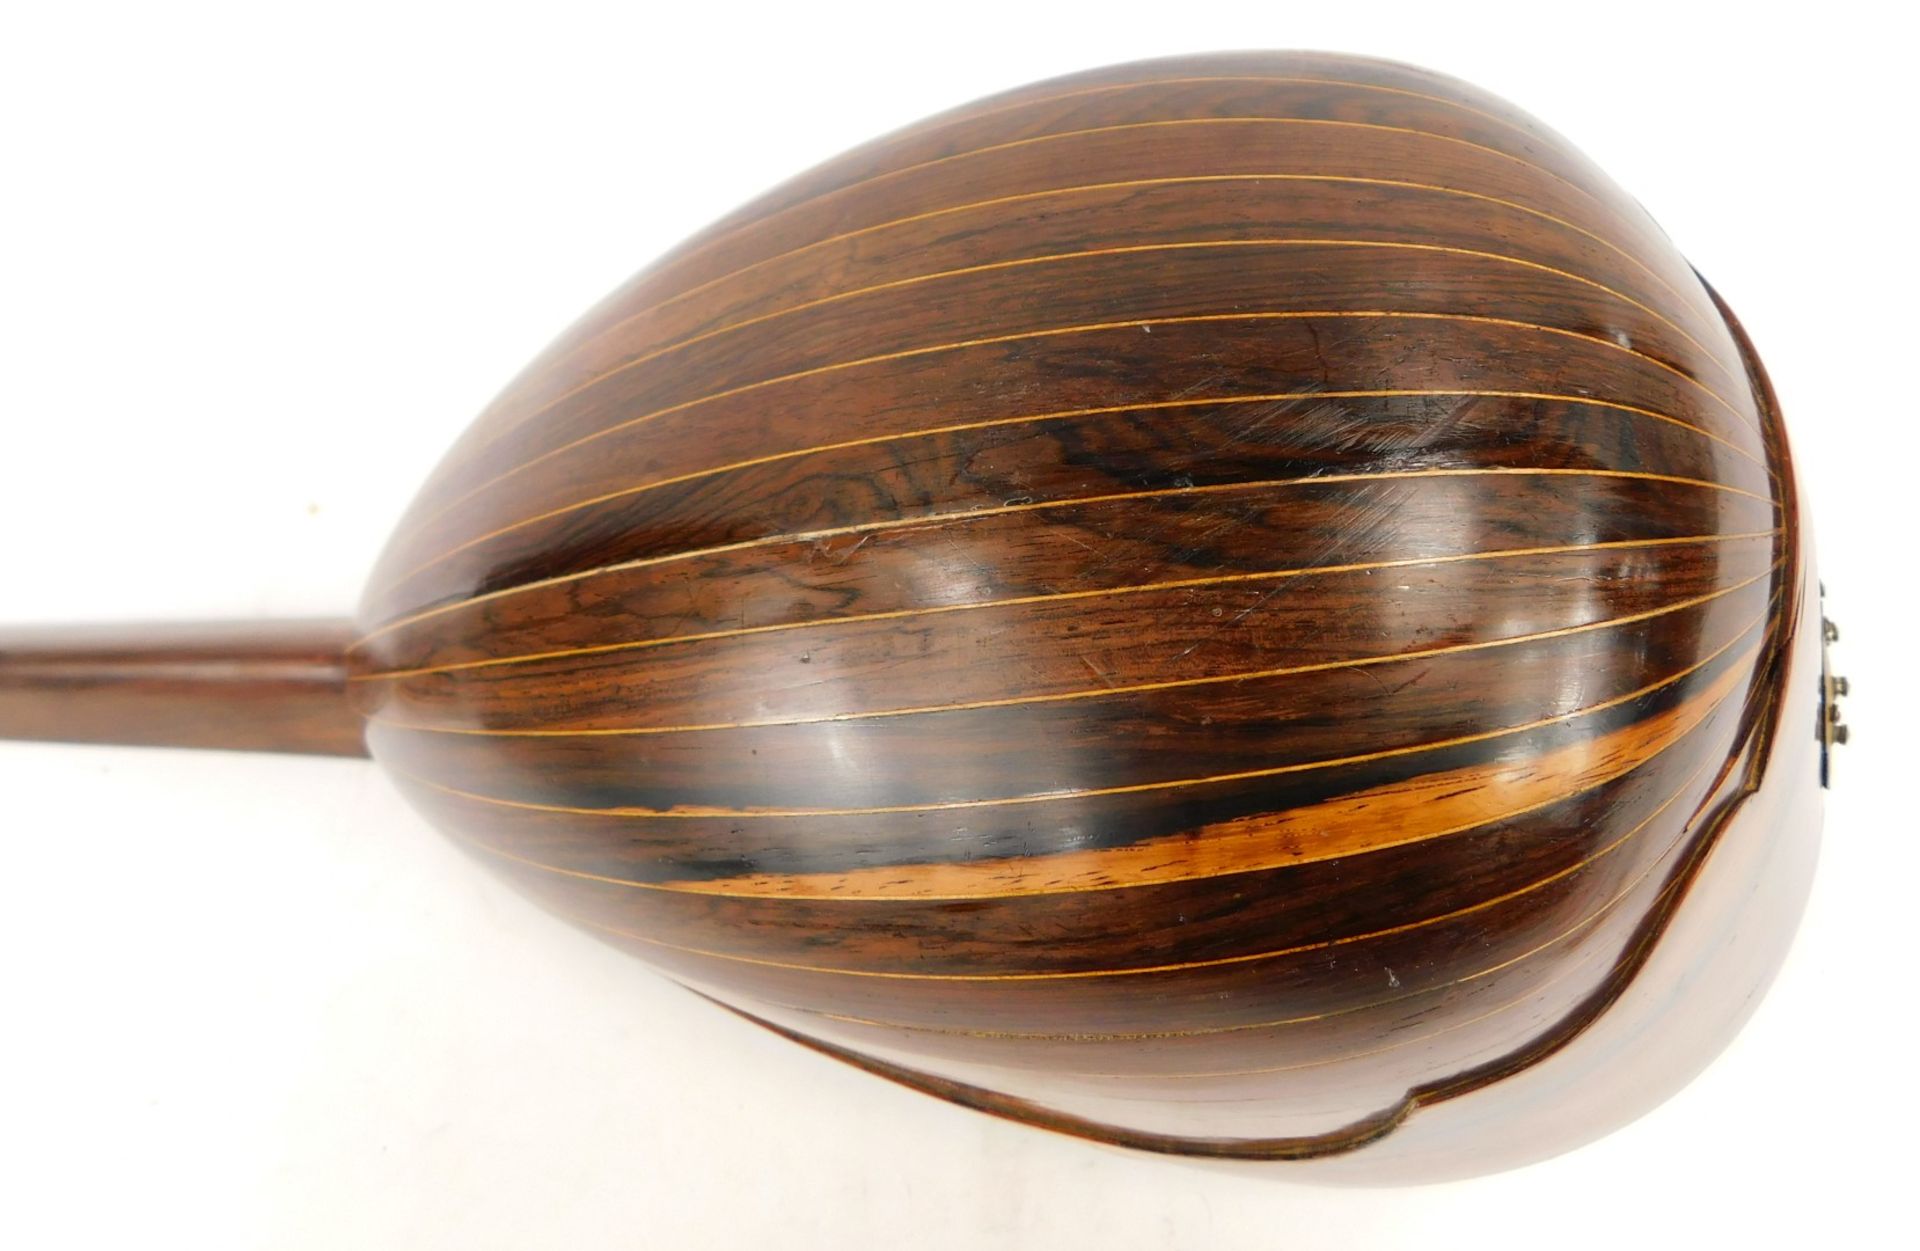 A Neopolitan mandolin, with tortoiseshell applied detail, with an ebonised stem and bone tuning pins - Image 6 of 8